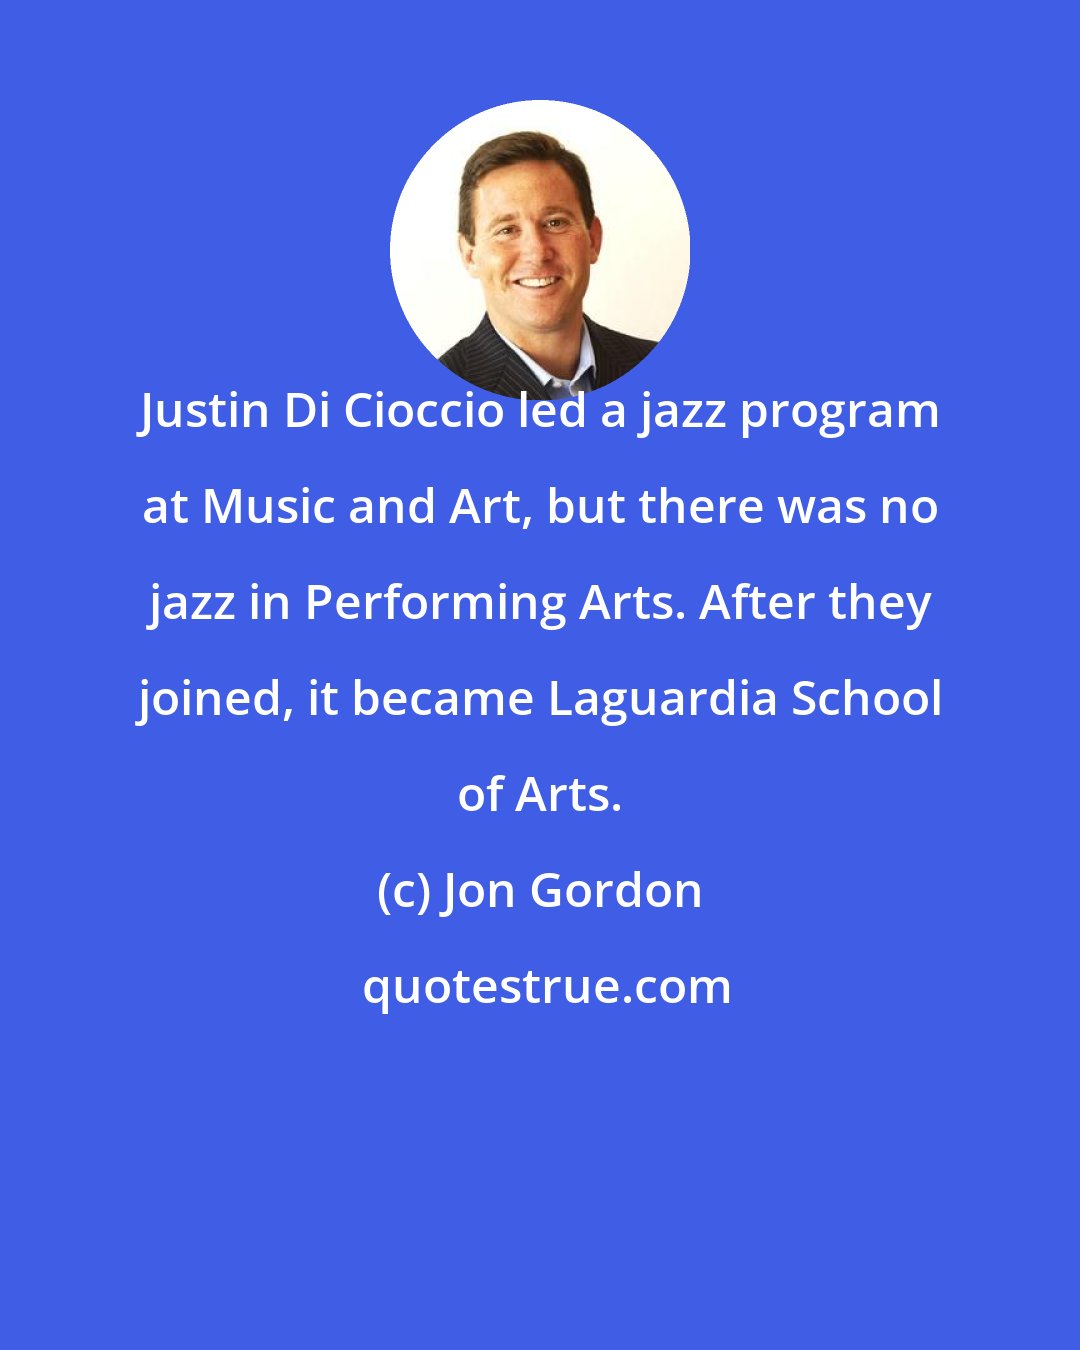 Jon Gordon: Justin Di Cioccio led a jazz program at Music and Art, but there was no jazz in Performing Arts. After they joined, it became Laguardia School of Arts.